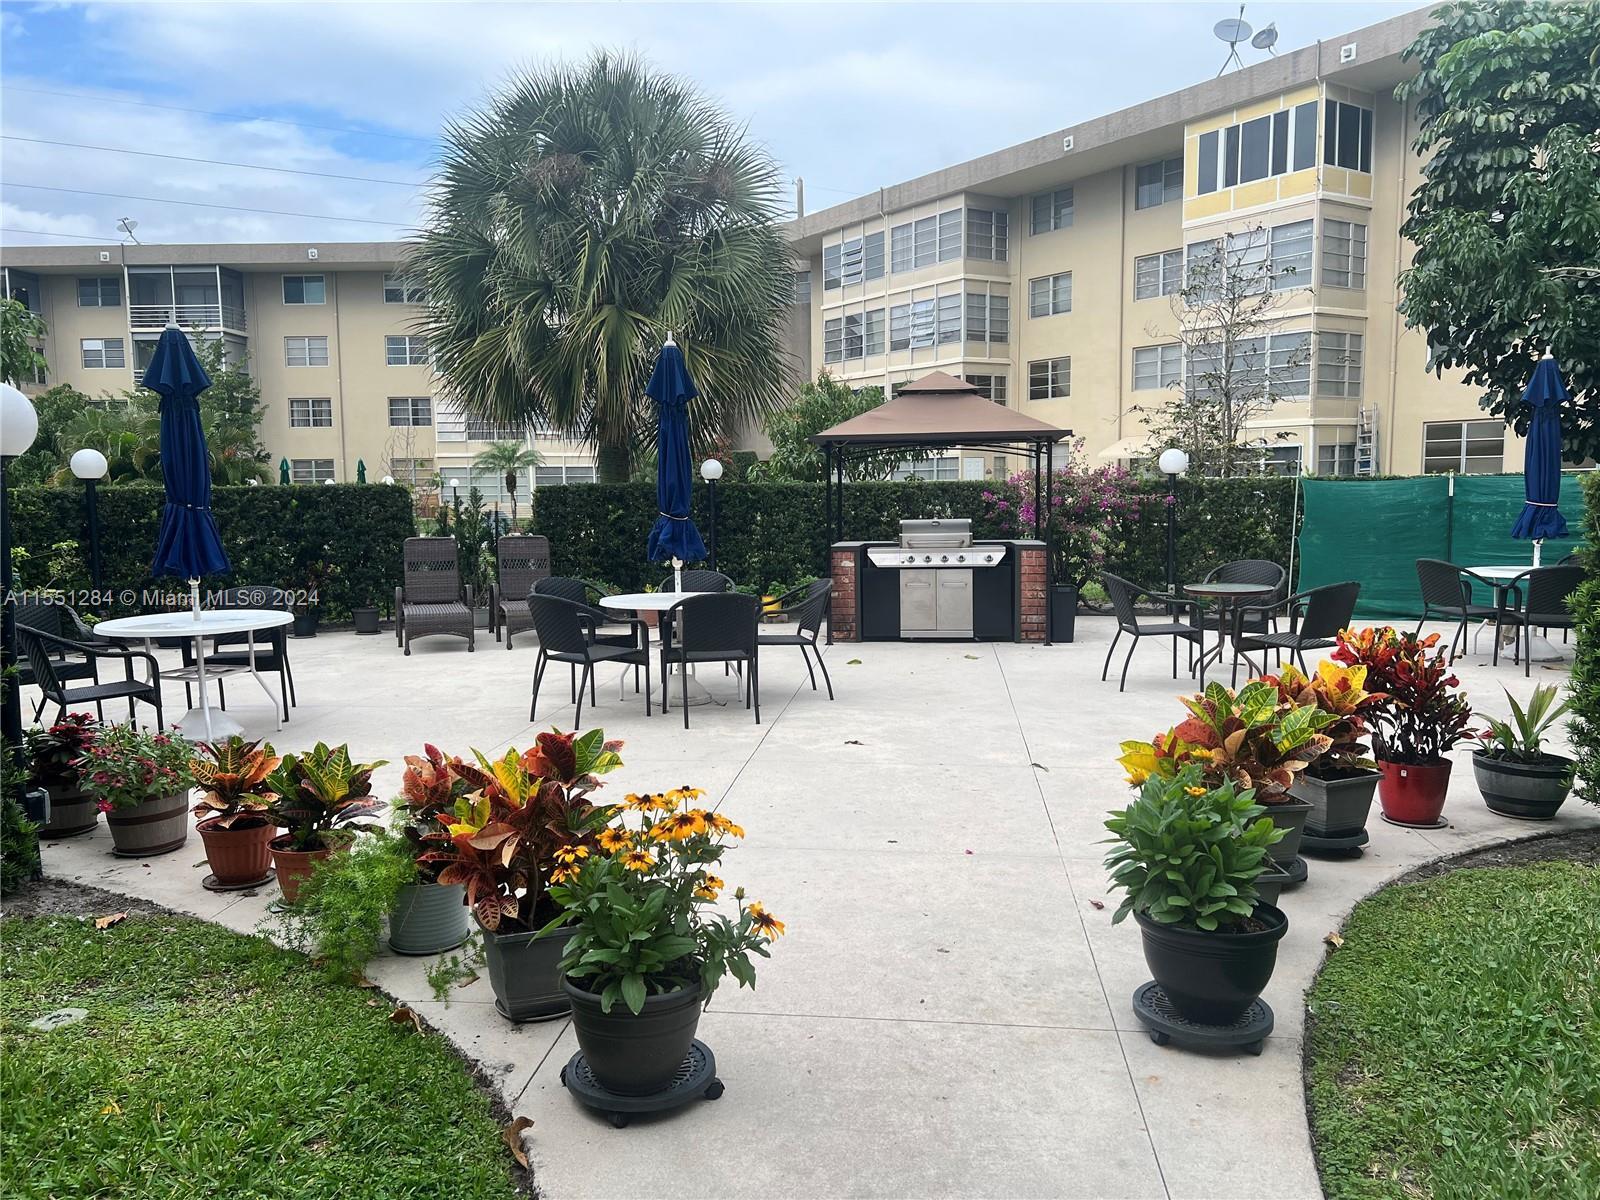 Photo of 3051 NW 46th Ave #304 in Lauderdale Lakes, FL